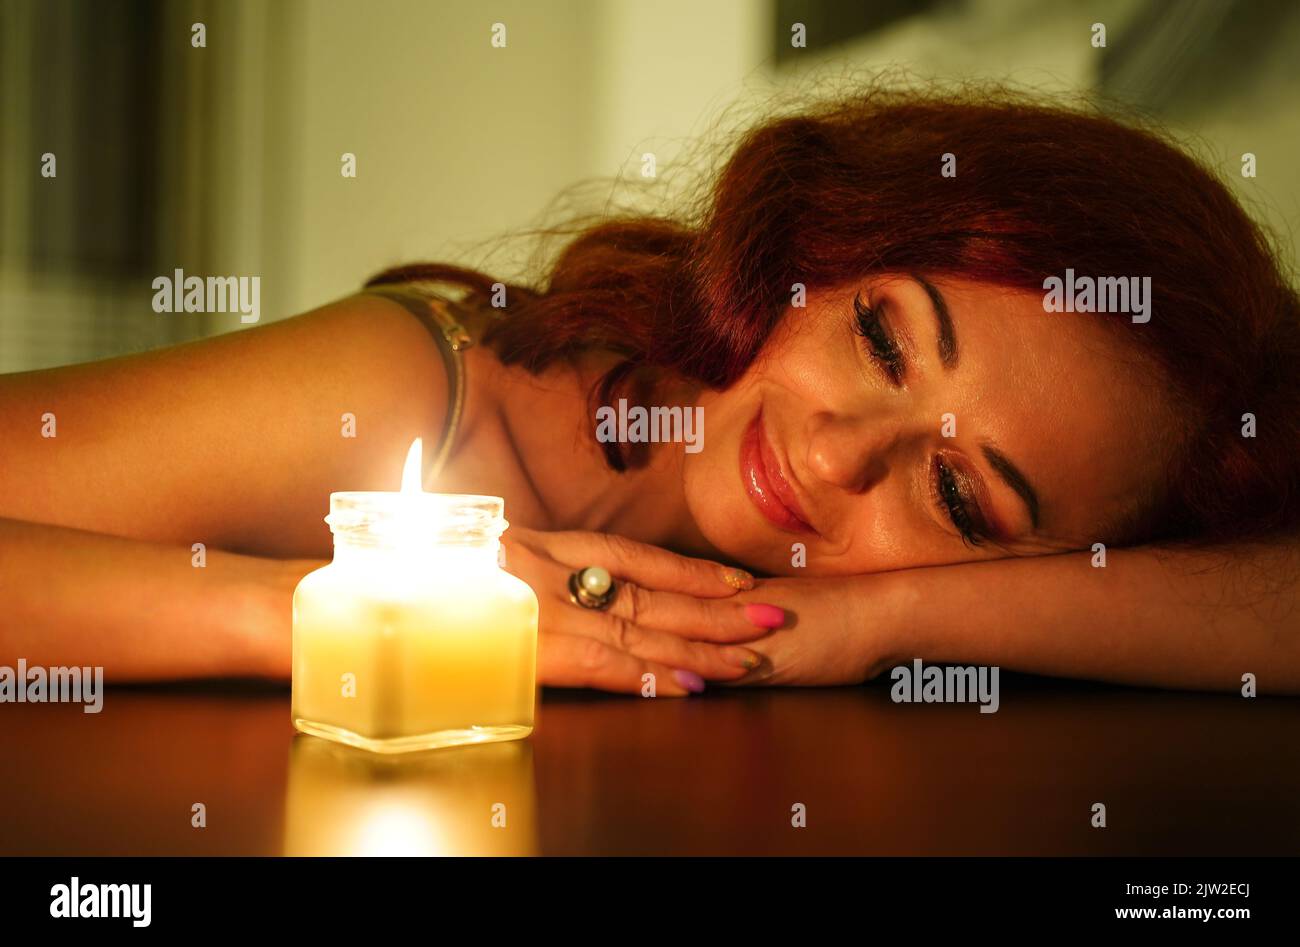 Happy relaxed woman enjoying the aroma of candle. Smiling girl looks at a burn candle in home cosiness in the evening. Rest self care Stock Photo